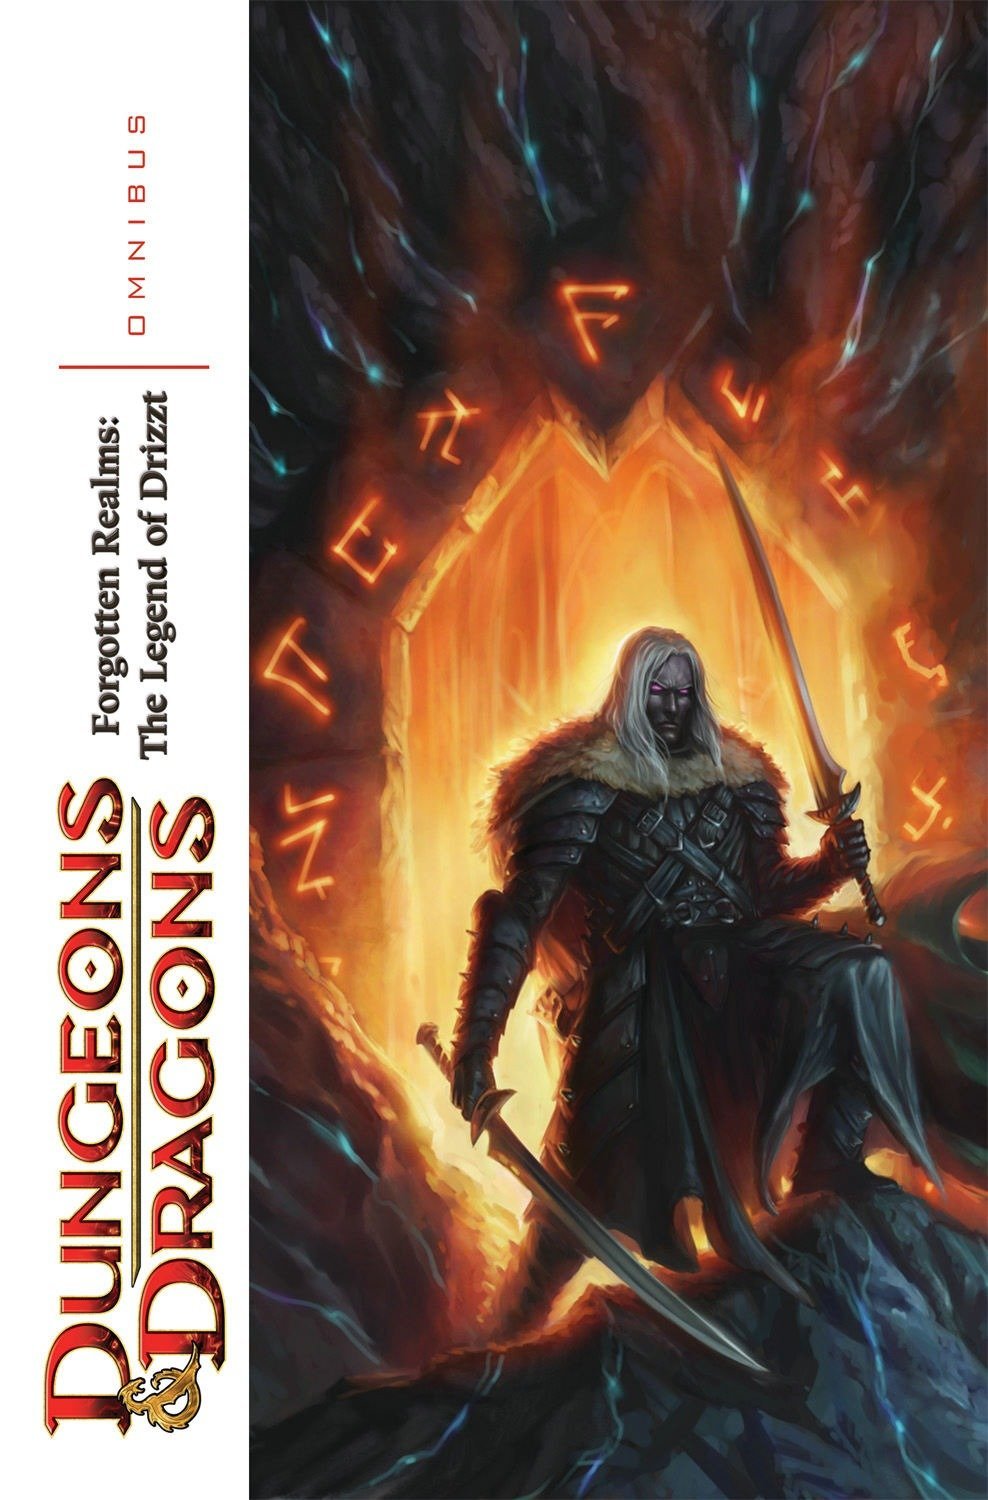 Dungeons & Dragons: Forgotten Realms - The Legend of Drizzt Omnibus Volume 1 (D&D Legends of Drizzt Omnibus)